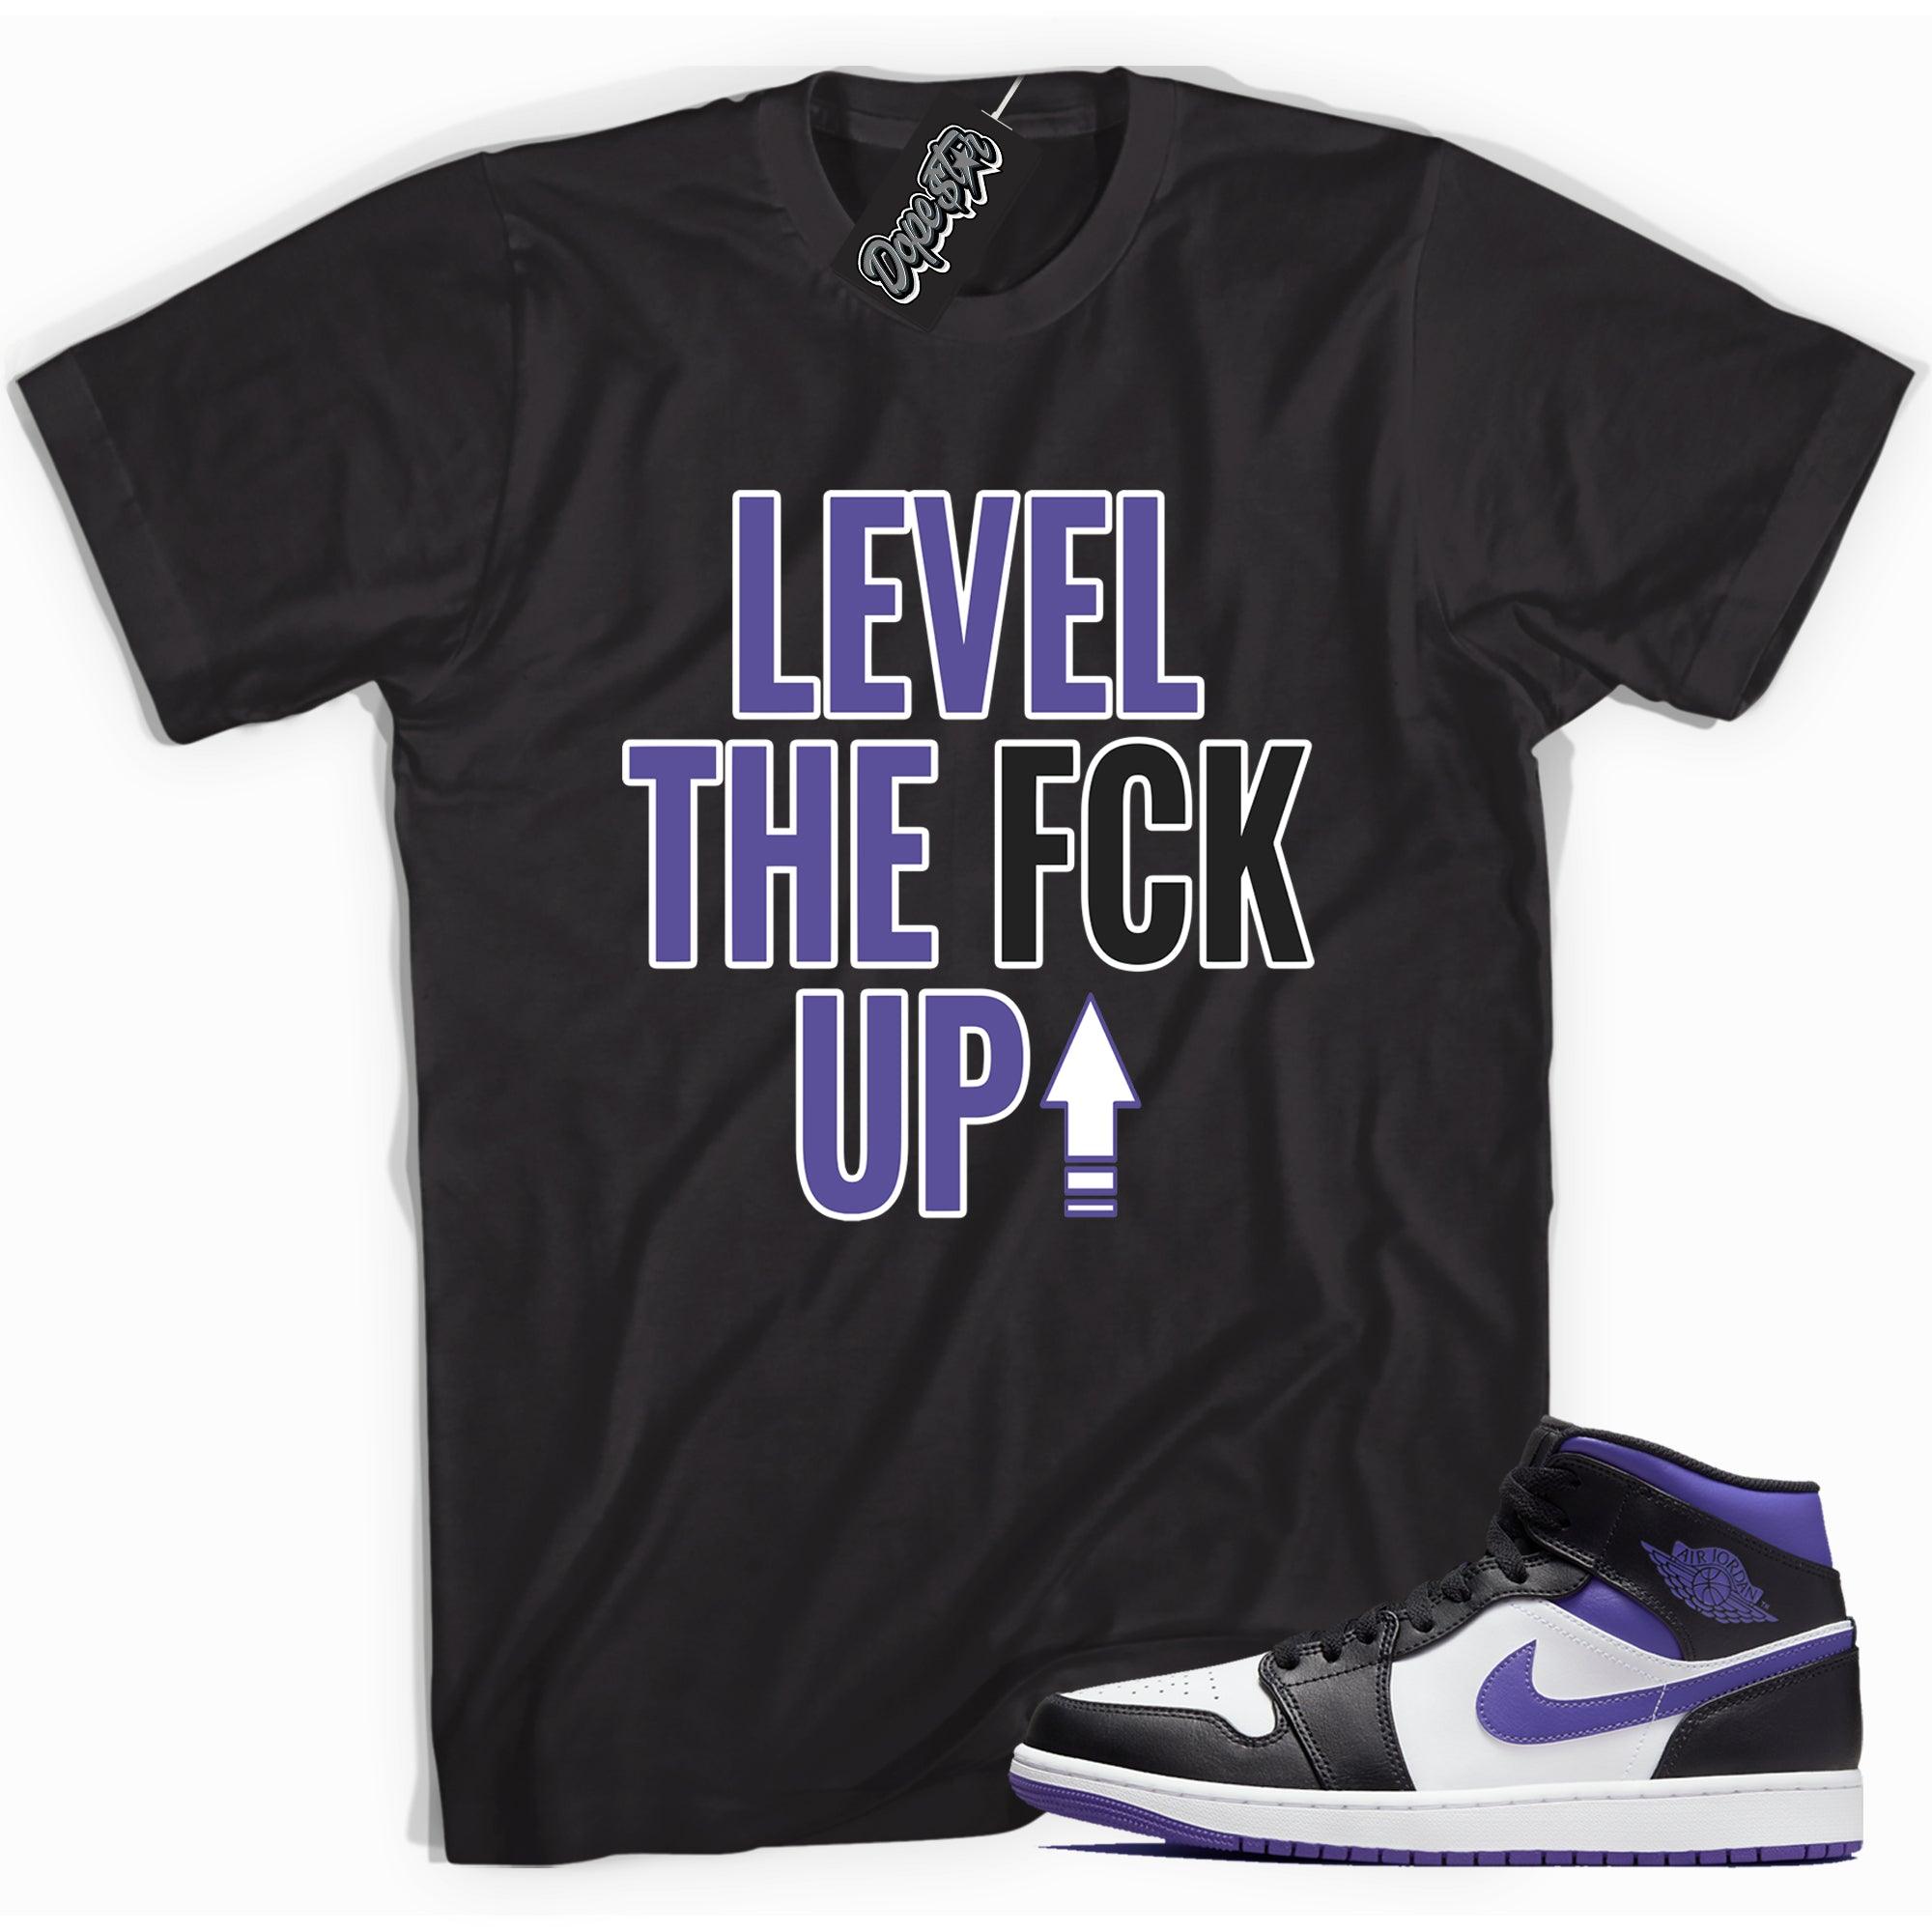 Cool black graphic tee with 'Level Up' print, that perfectly matches Air Jordan 1 Mid White Black Purple sneakers.